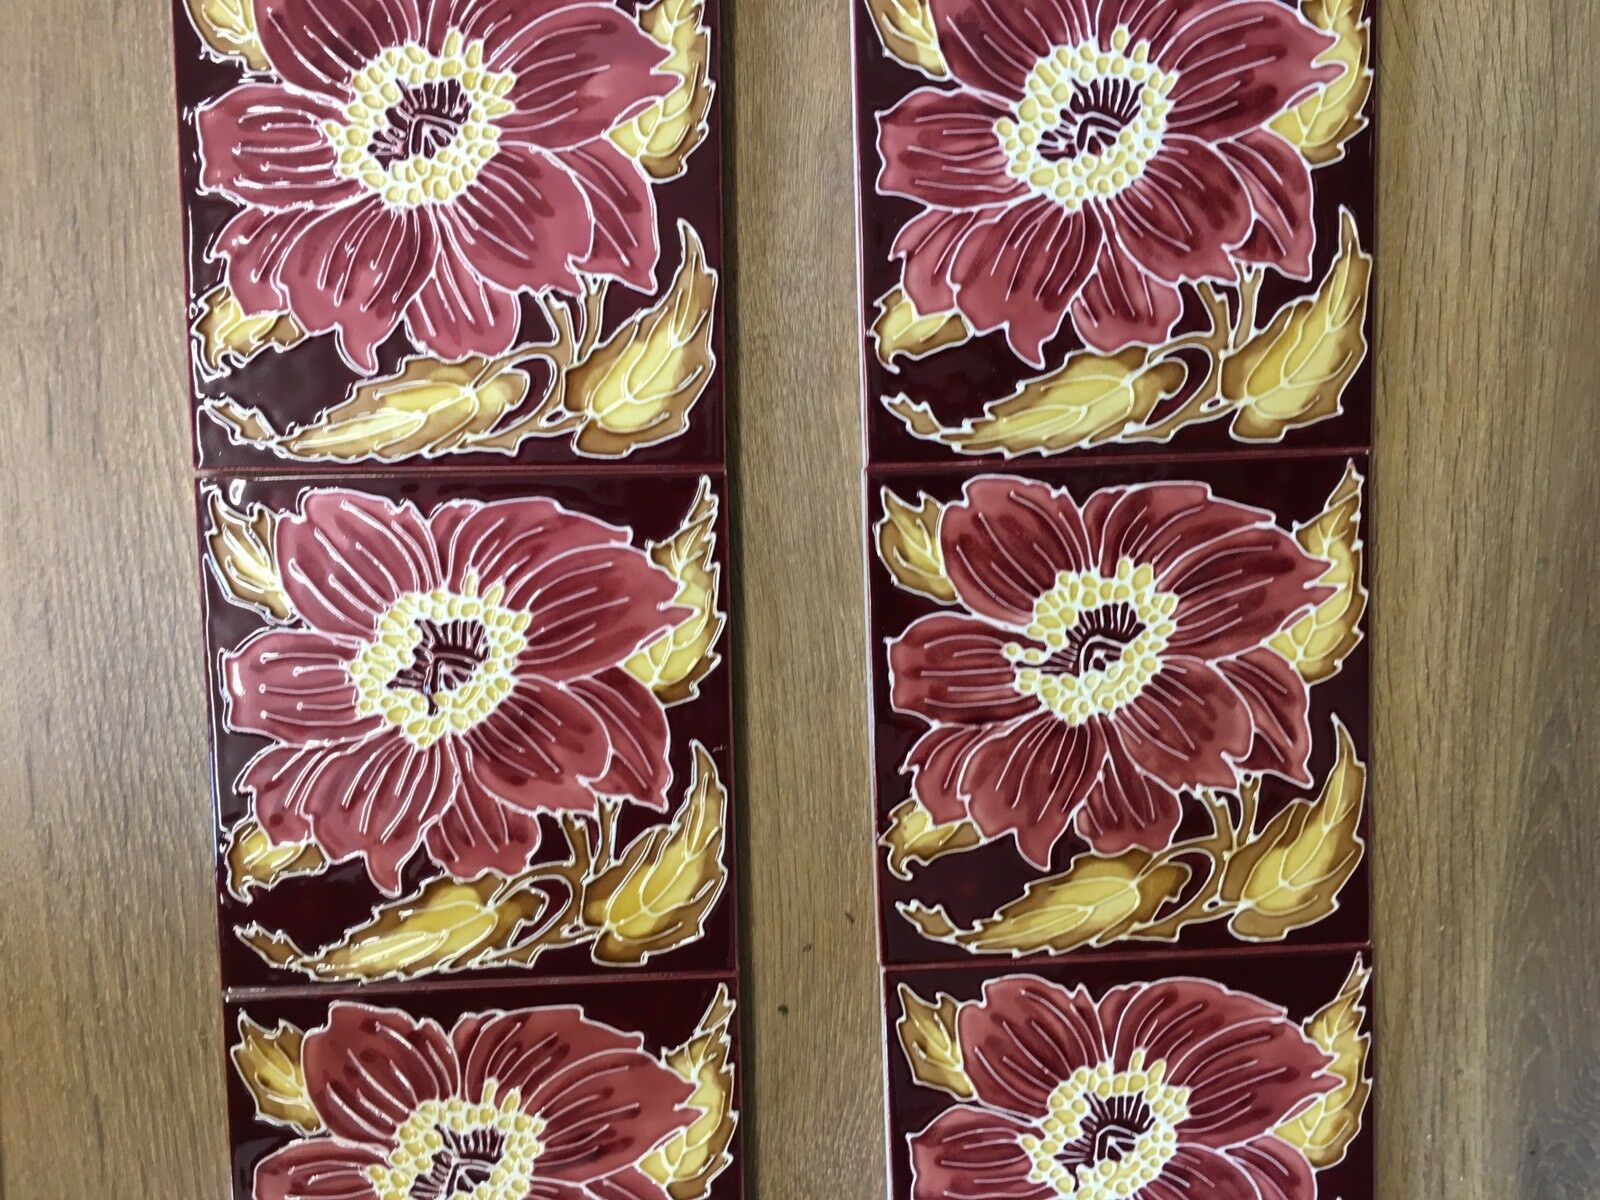 J DAY 10233 STOVAX “CHRYSANTHEMUM” TUBE LINED FIREPLACE TILES x10 ...